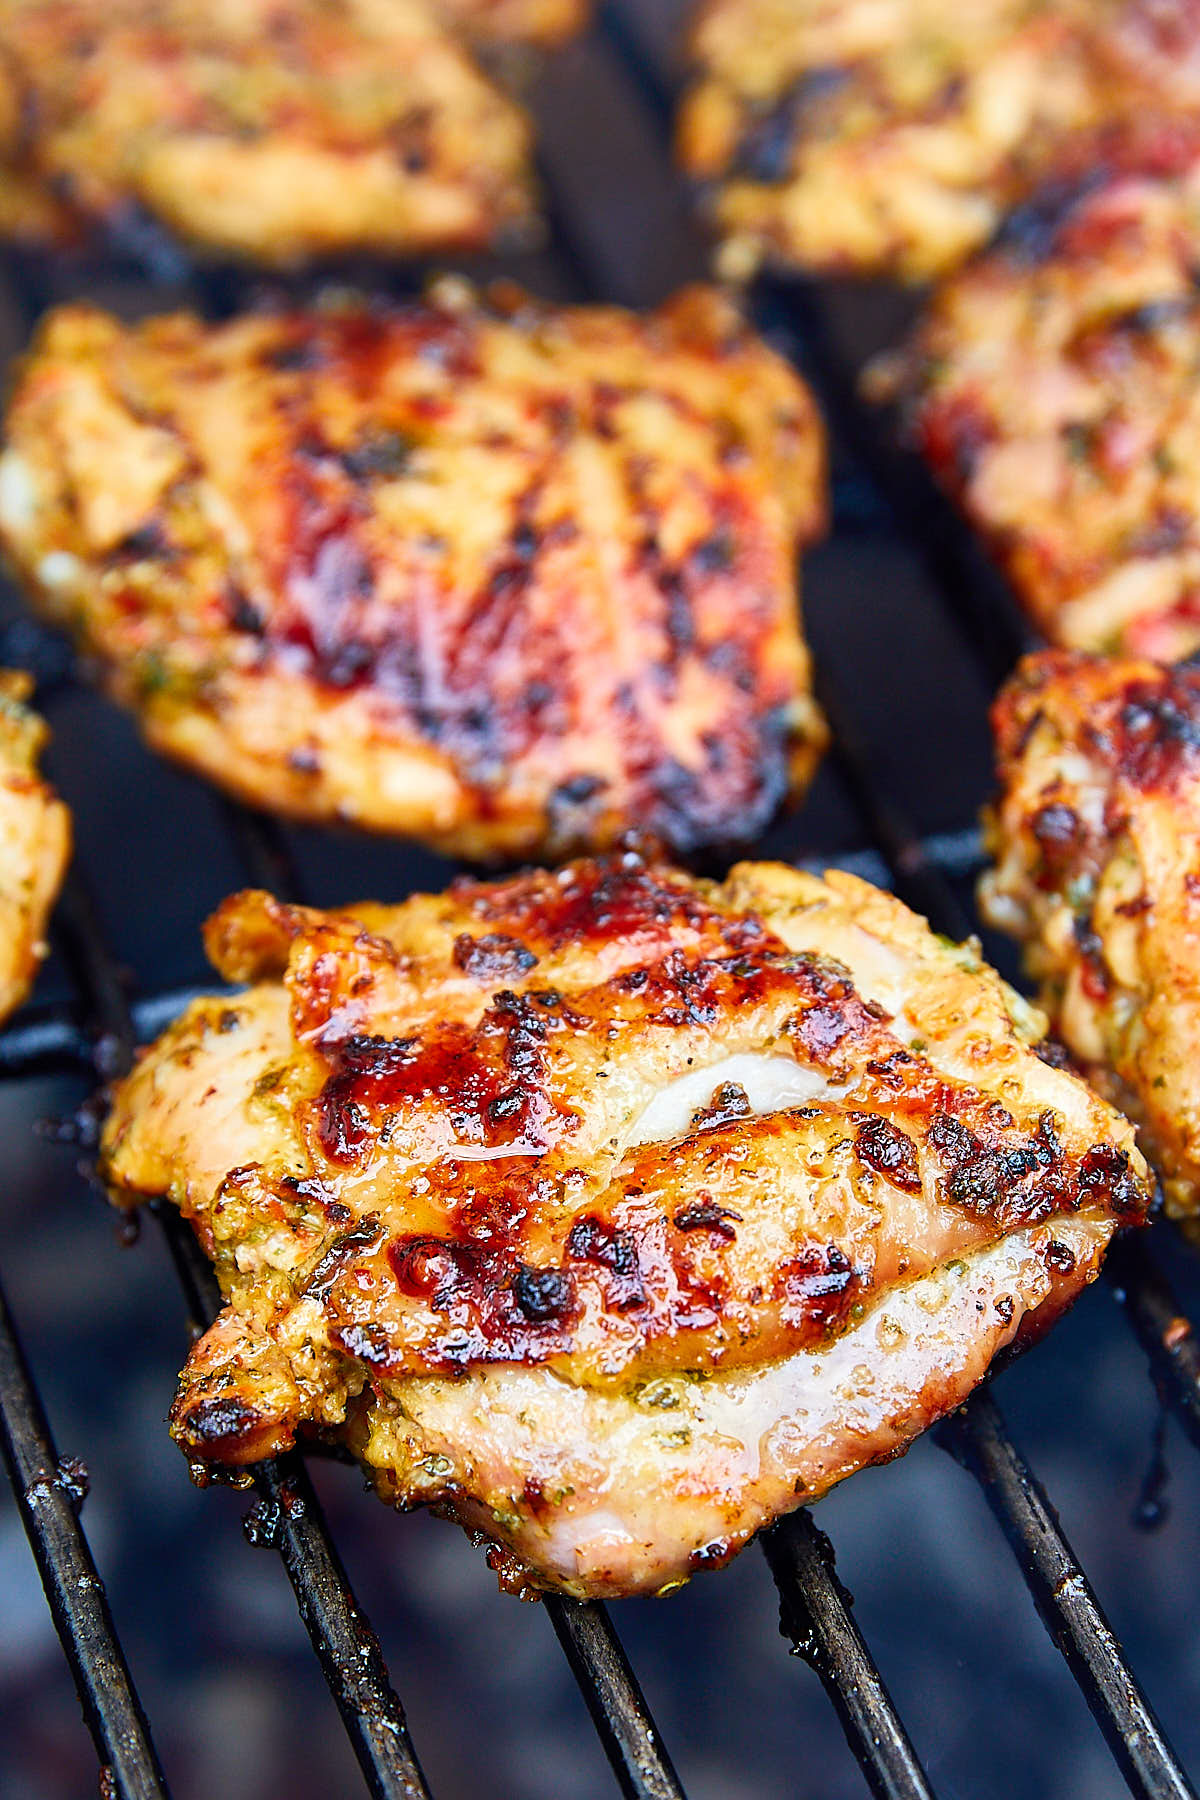 Chicken thighs on a charcoal grill rack over hot charcoal.